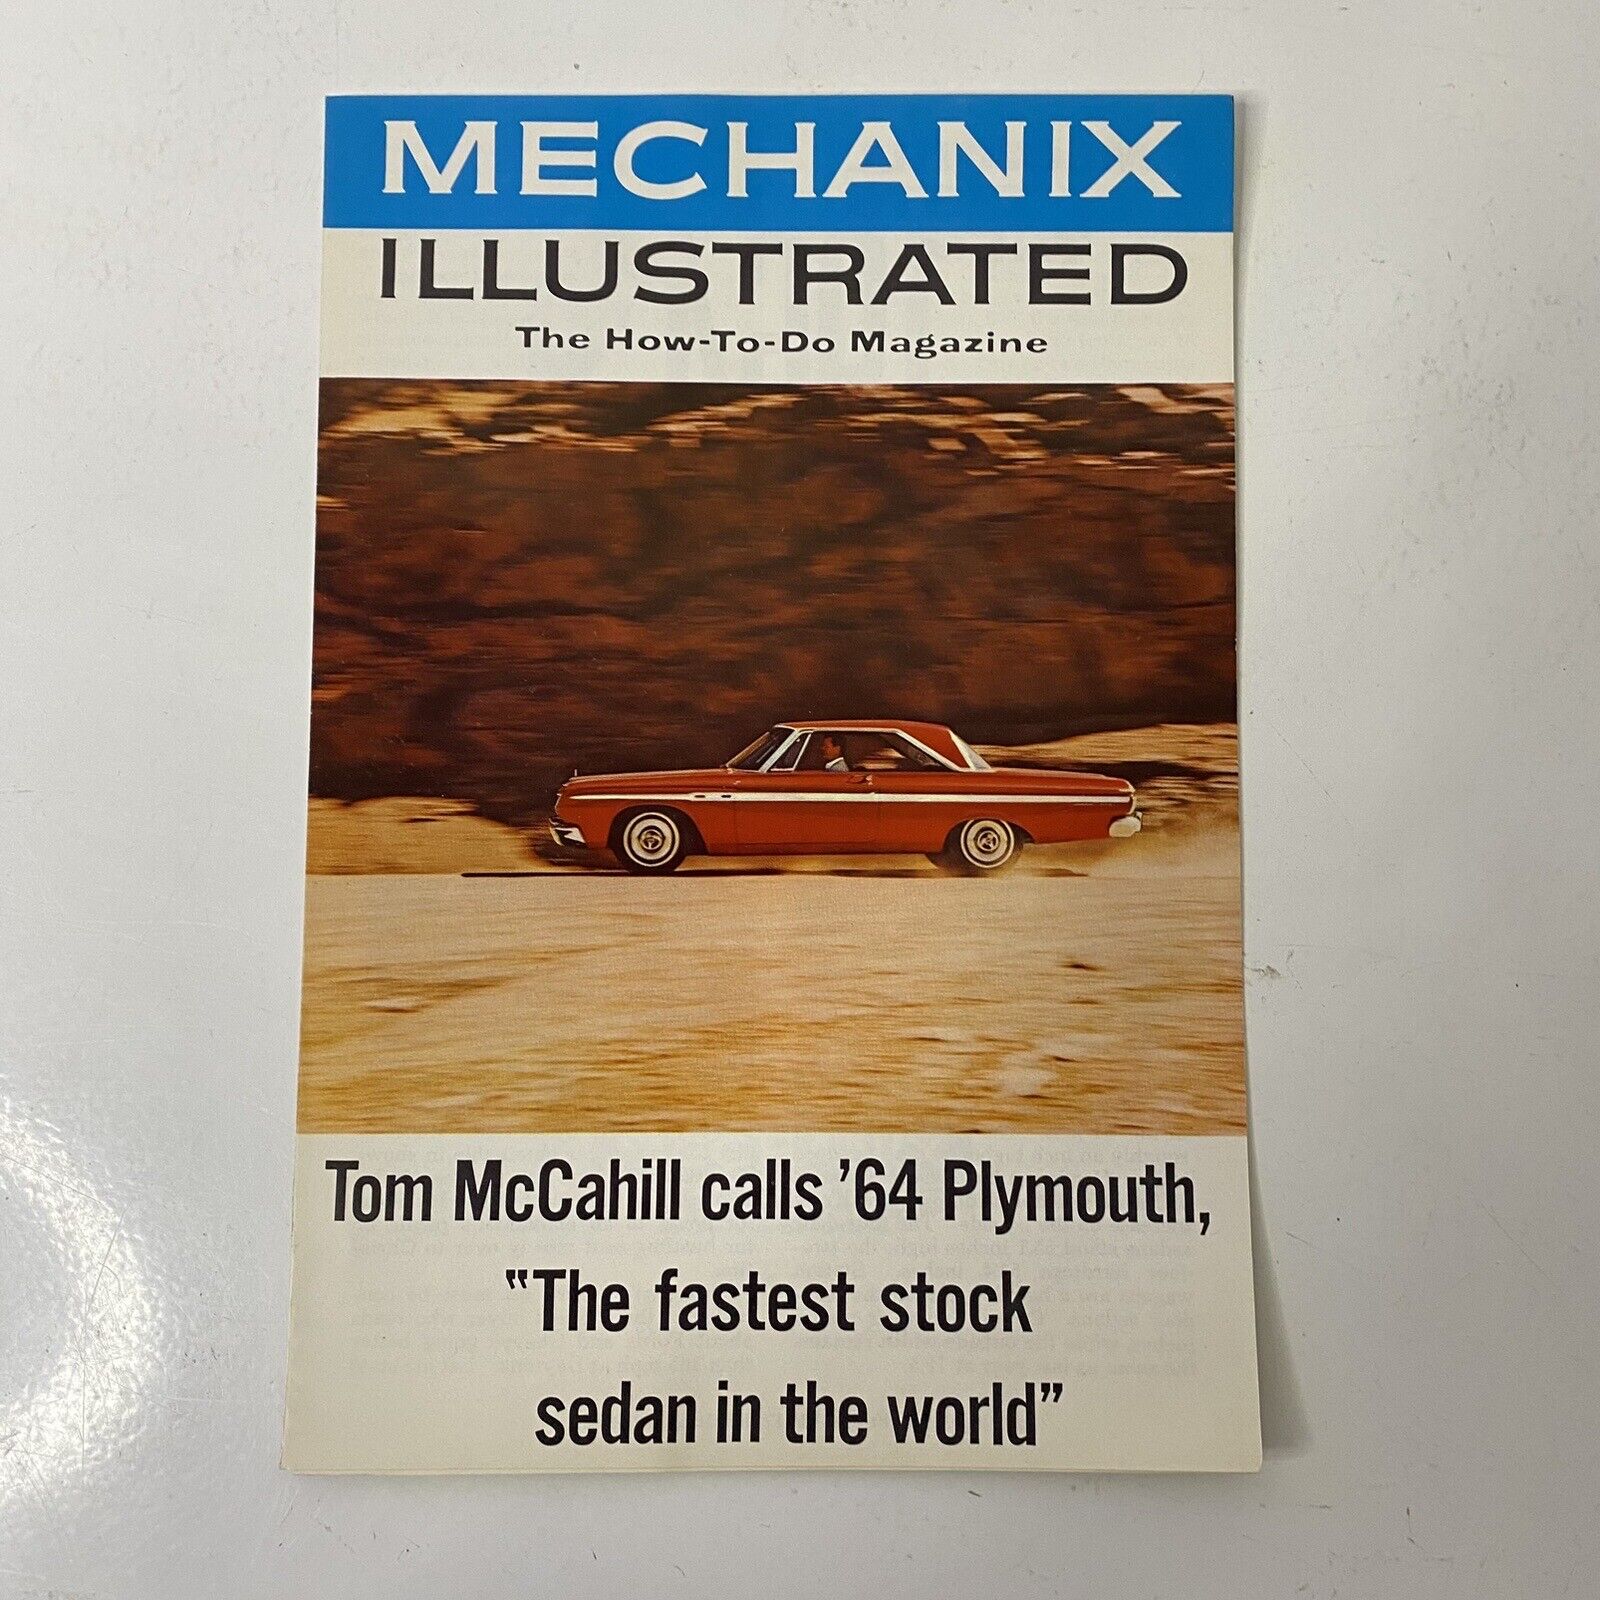 Mechanix Illustrated 1964 Plymouth Tom McCahill